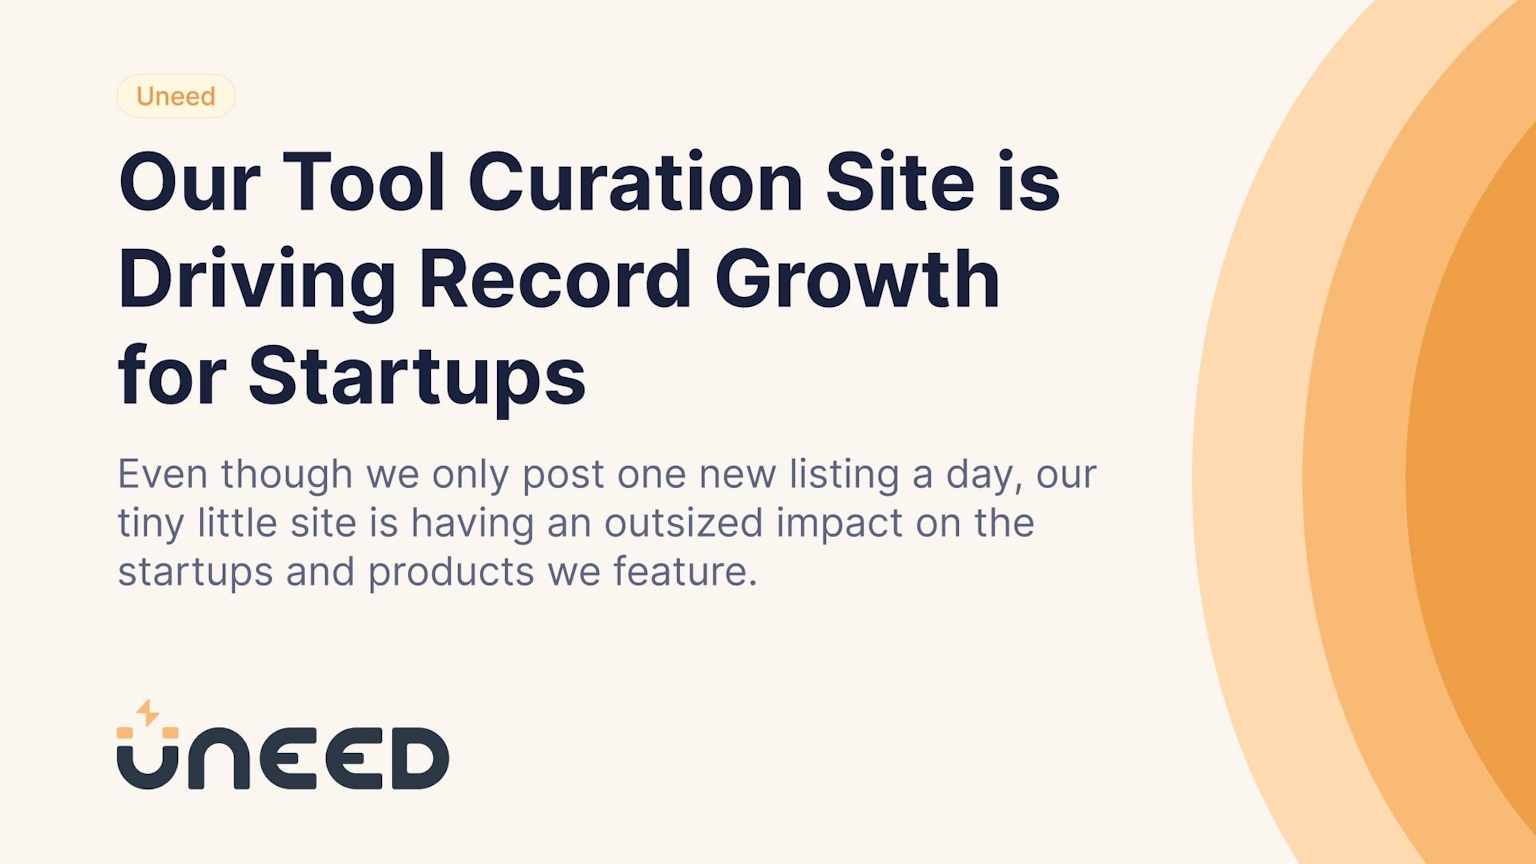 Uneed.best - Our Tool Curation Site is Driving Record Growth for Startups